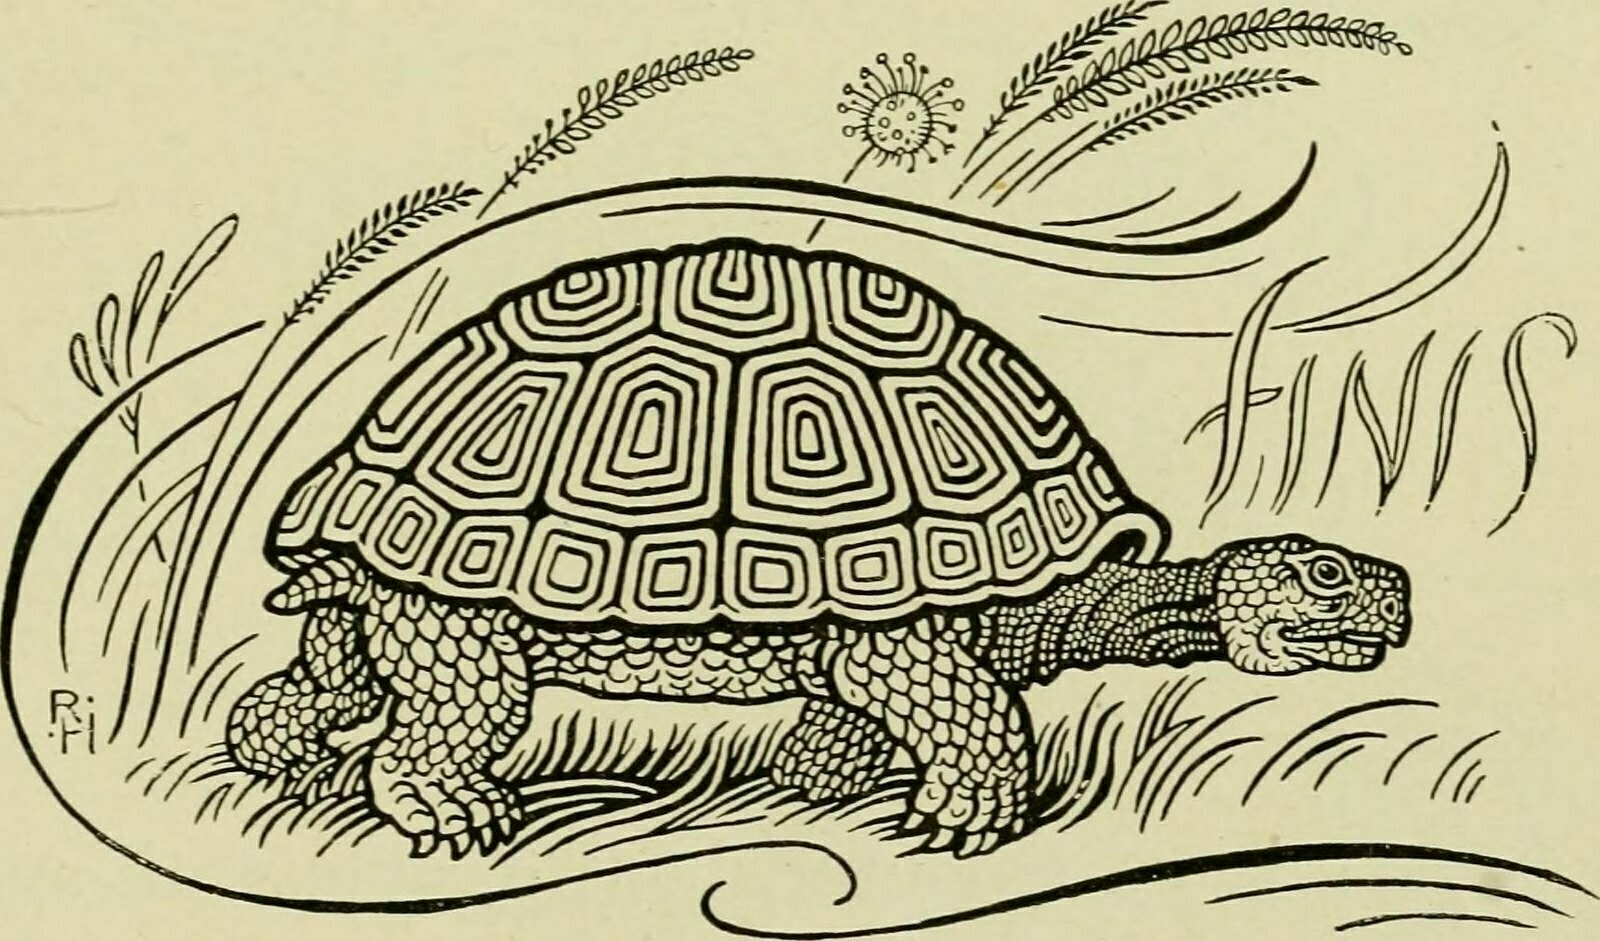 Ink sketch of the tortoise from Aesop's Fables, 1894